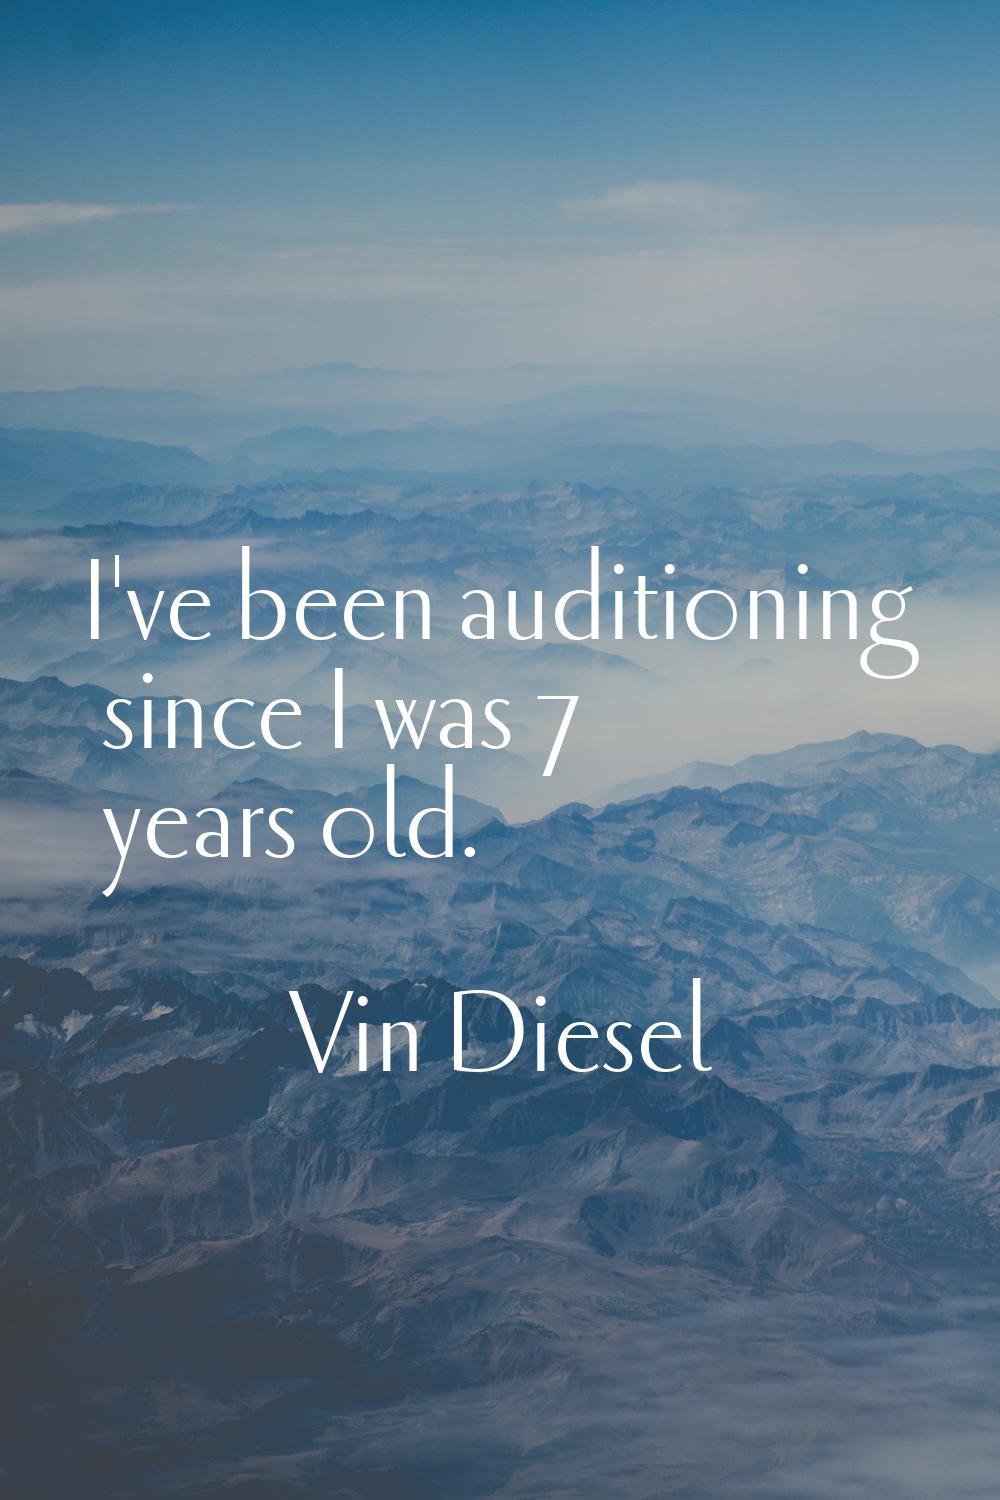 I've been auditioning since I was 7 years old.